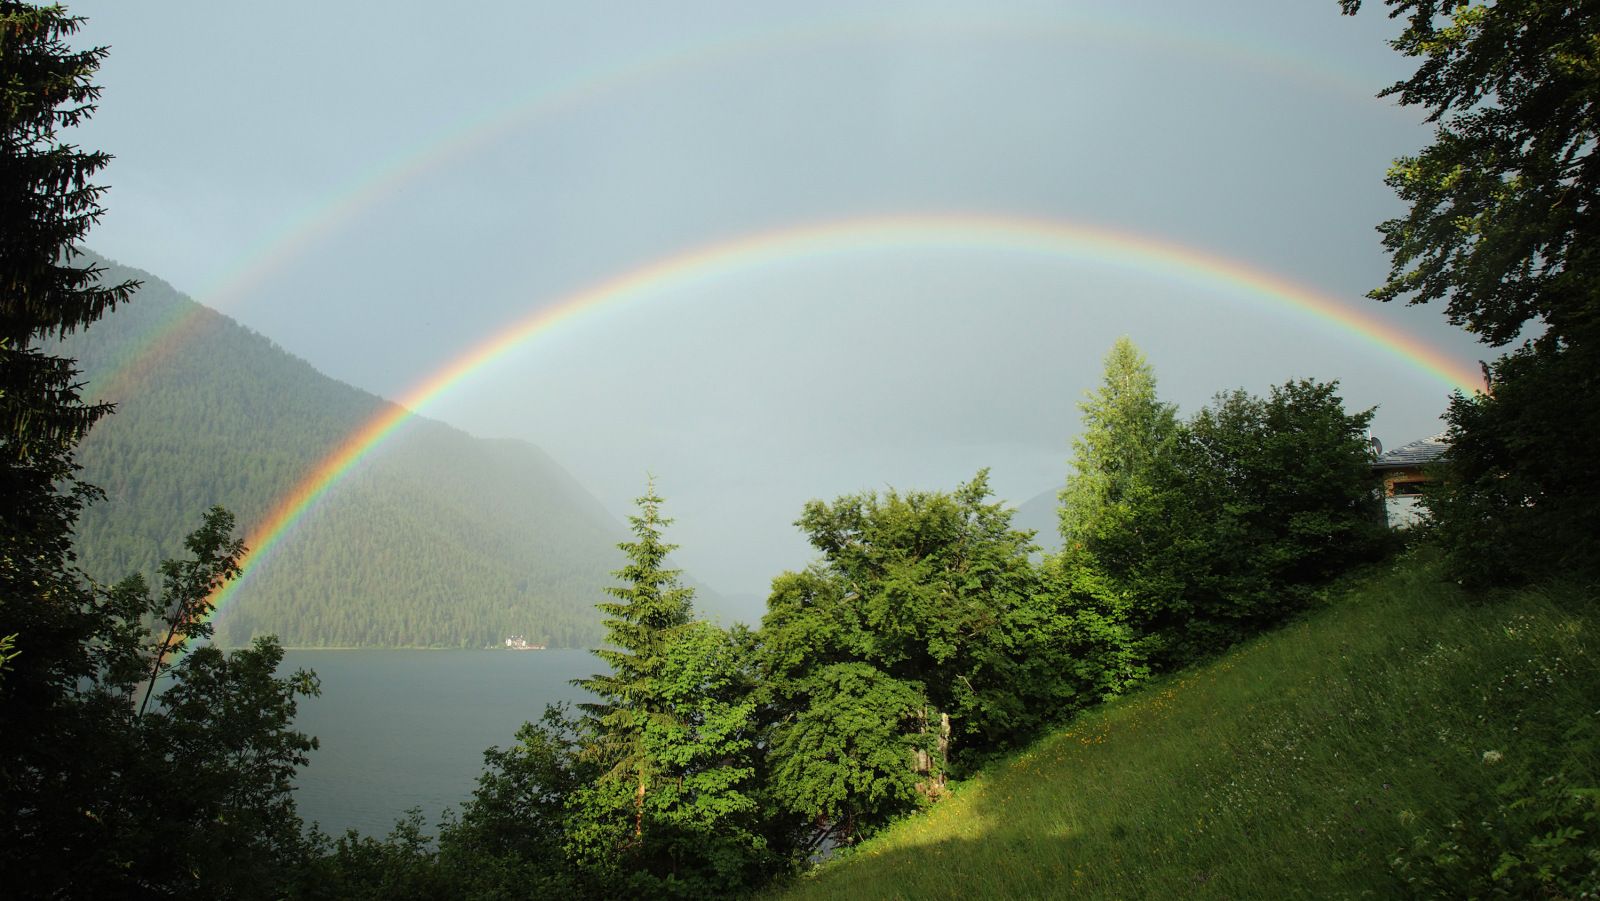 A double rainbow appears above Lake Weissensee in Naggl in Austria's southern Carinthia province July 10, 2013. REUTERS/Heinz-Peter Bader  (AUSTRIA - Tags: TRAVEL ENVIRONMENT SOCIETY)  - RTX11J42